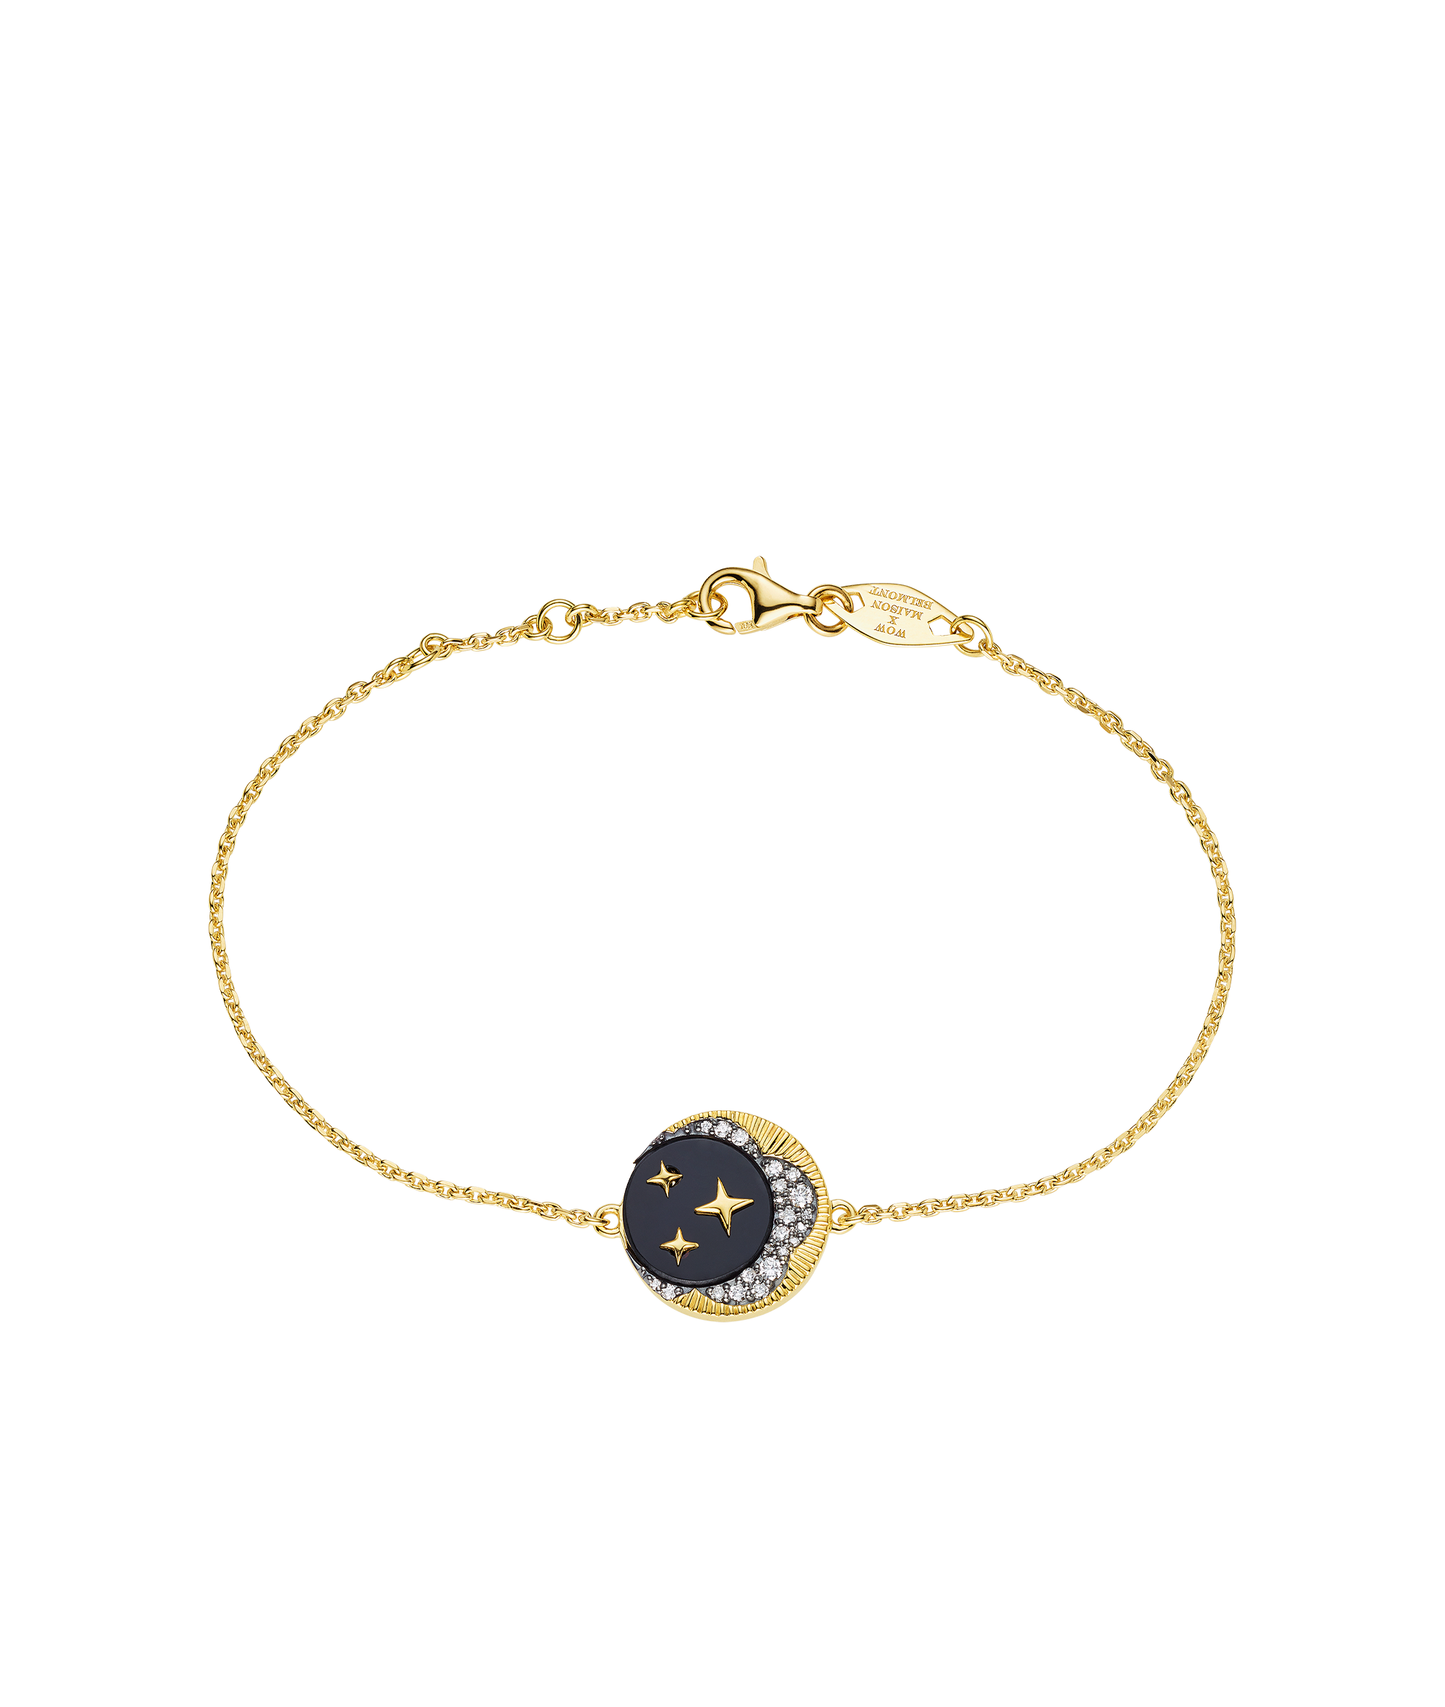 'Look Up At The Moon' Bracelet Onyx